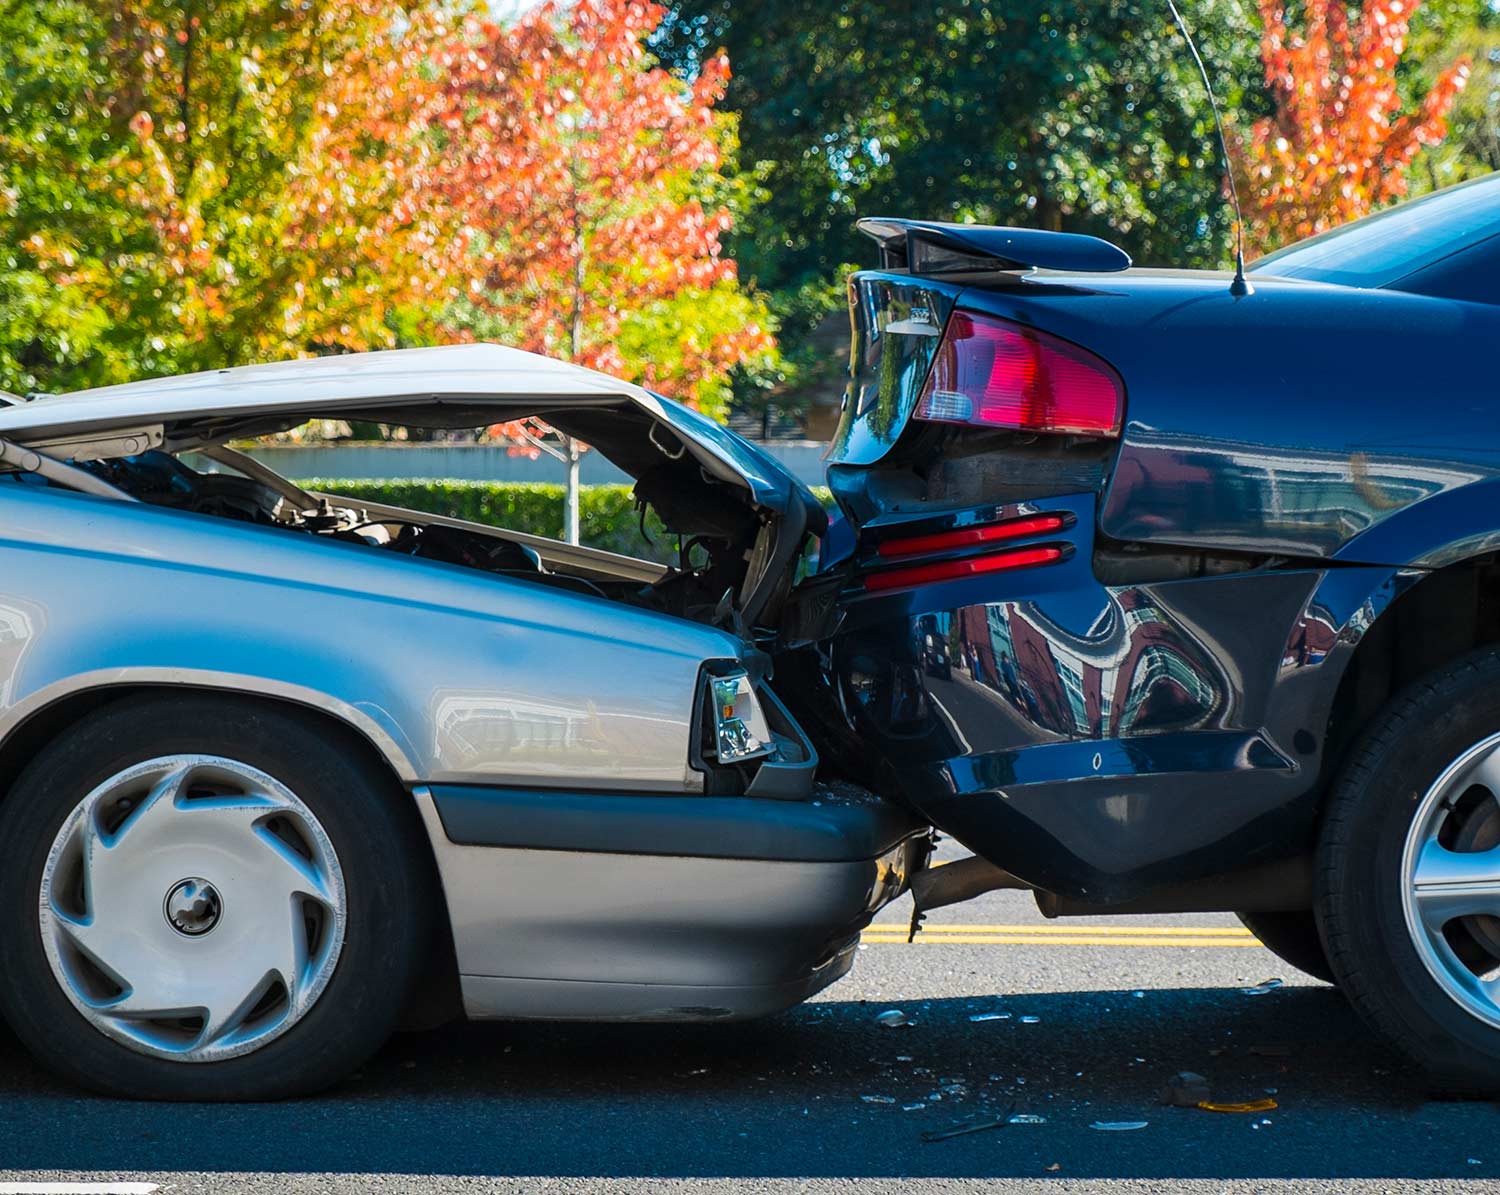 Time to call an auto accident attorney in Las Vegas, NV